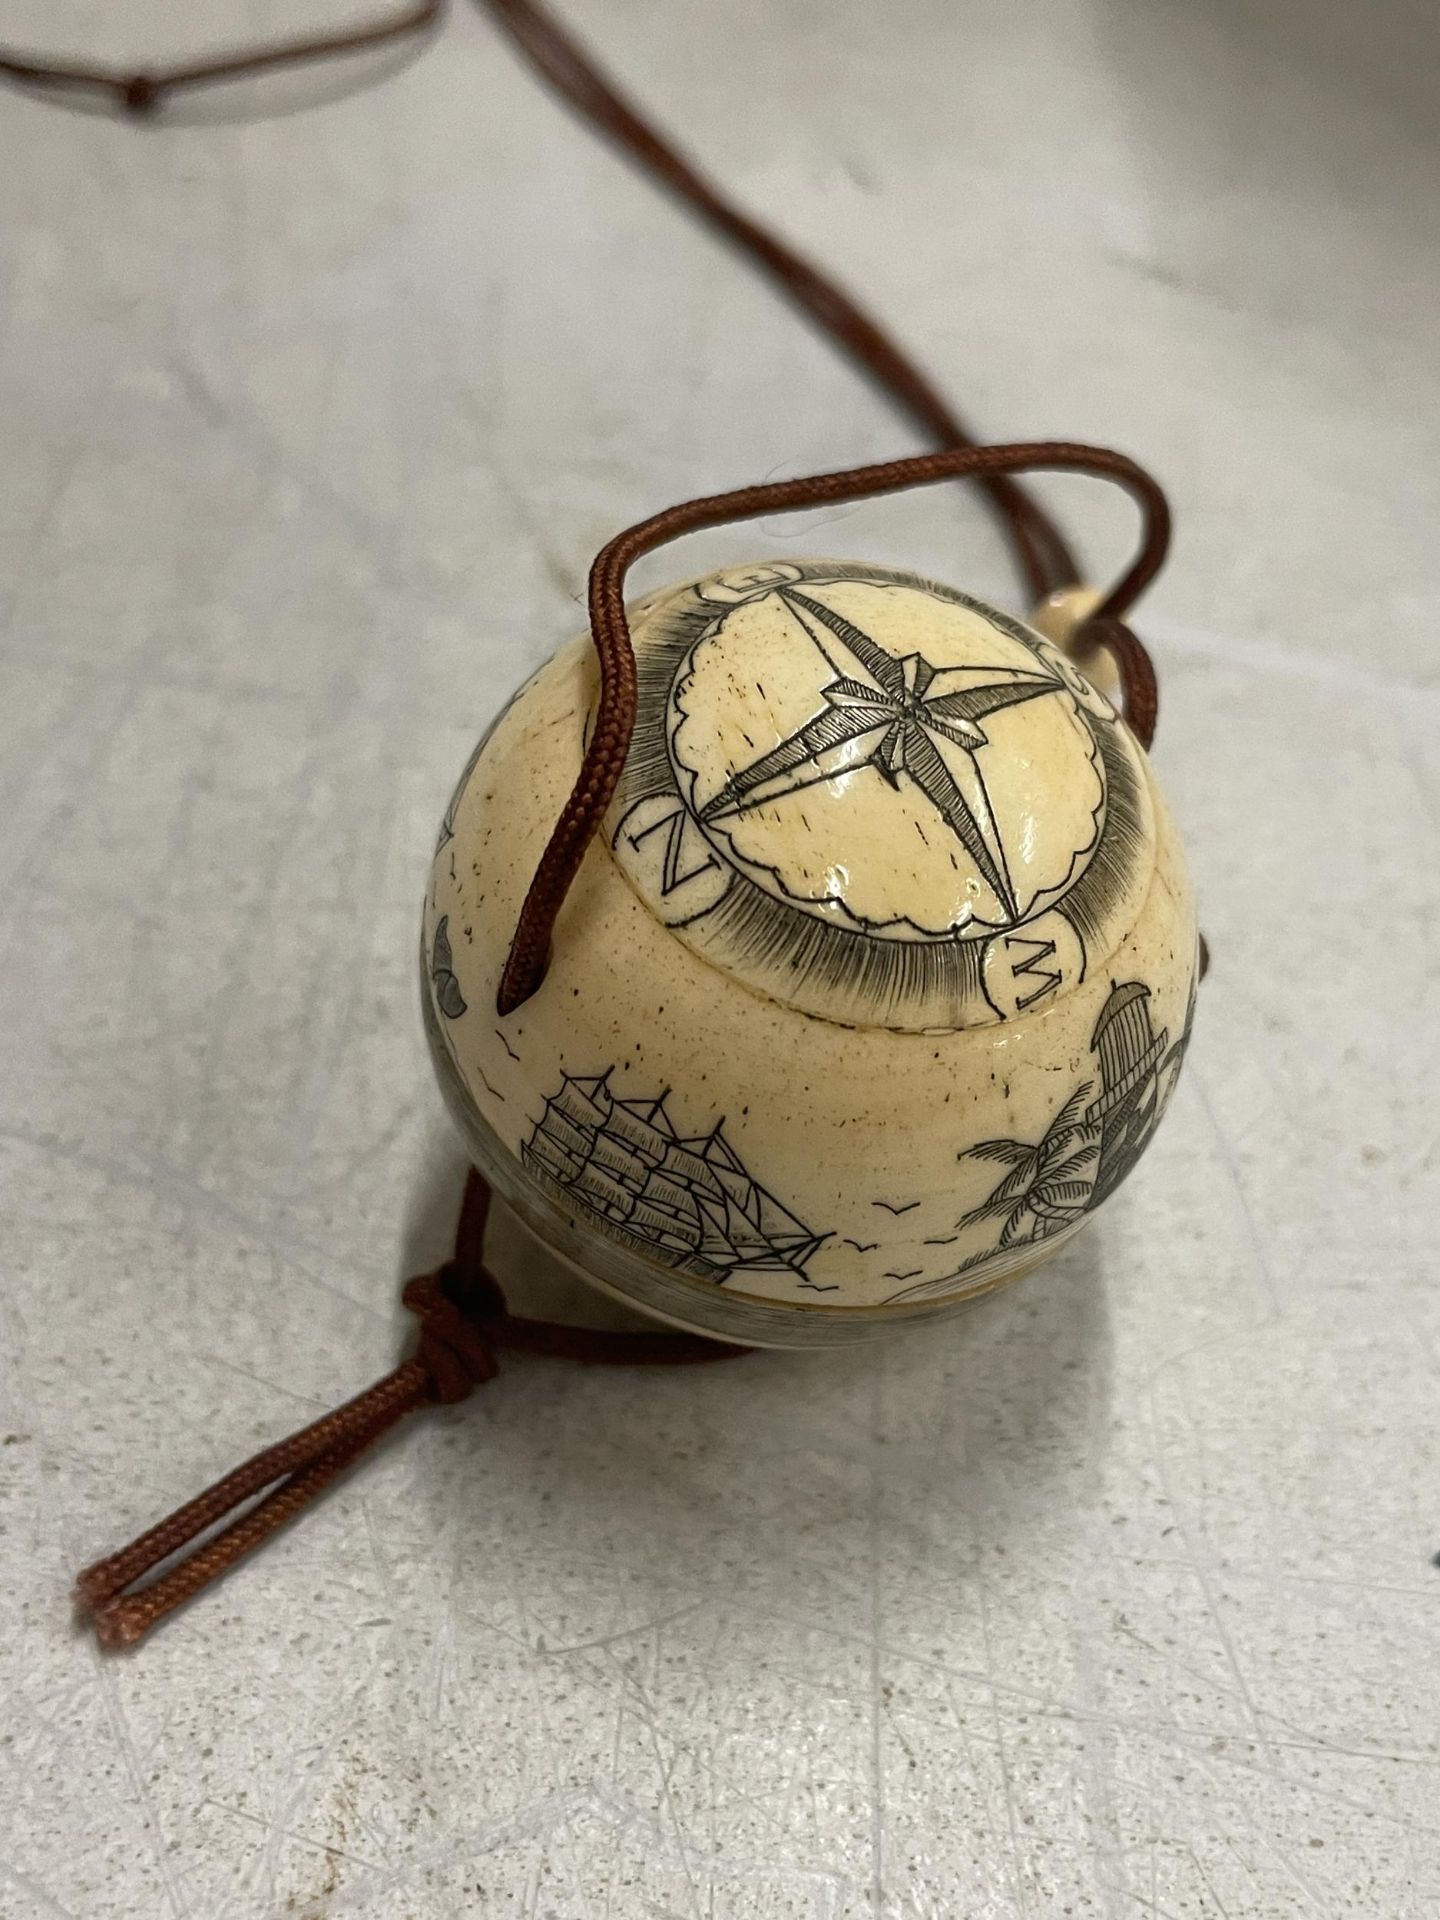 A BONE CARVED COMPASS ON A CORD